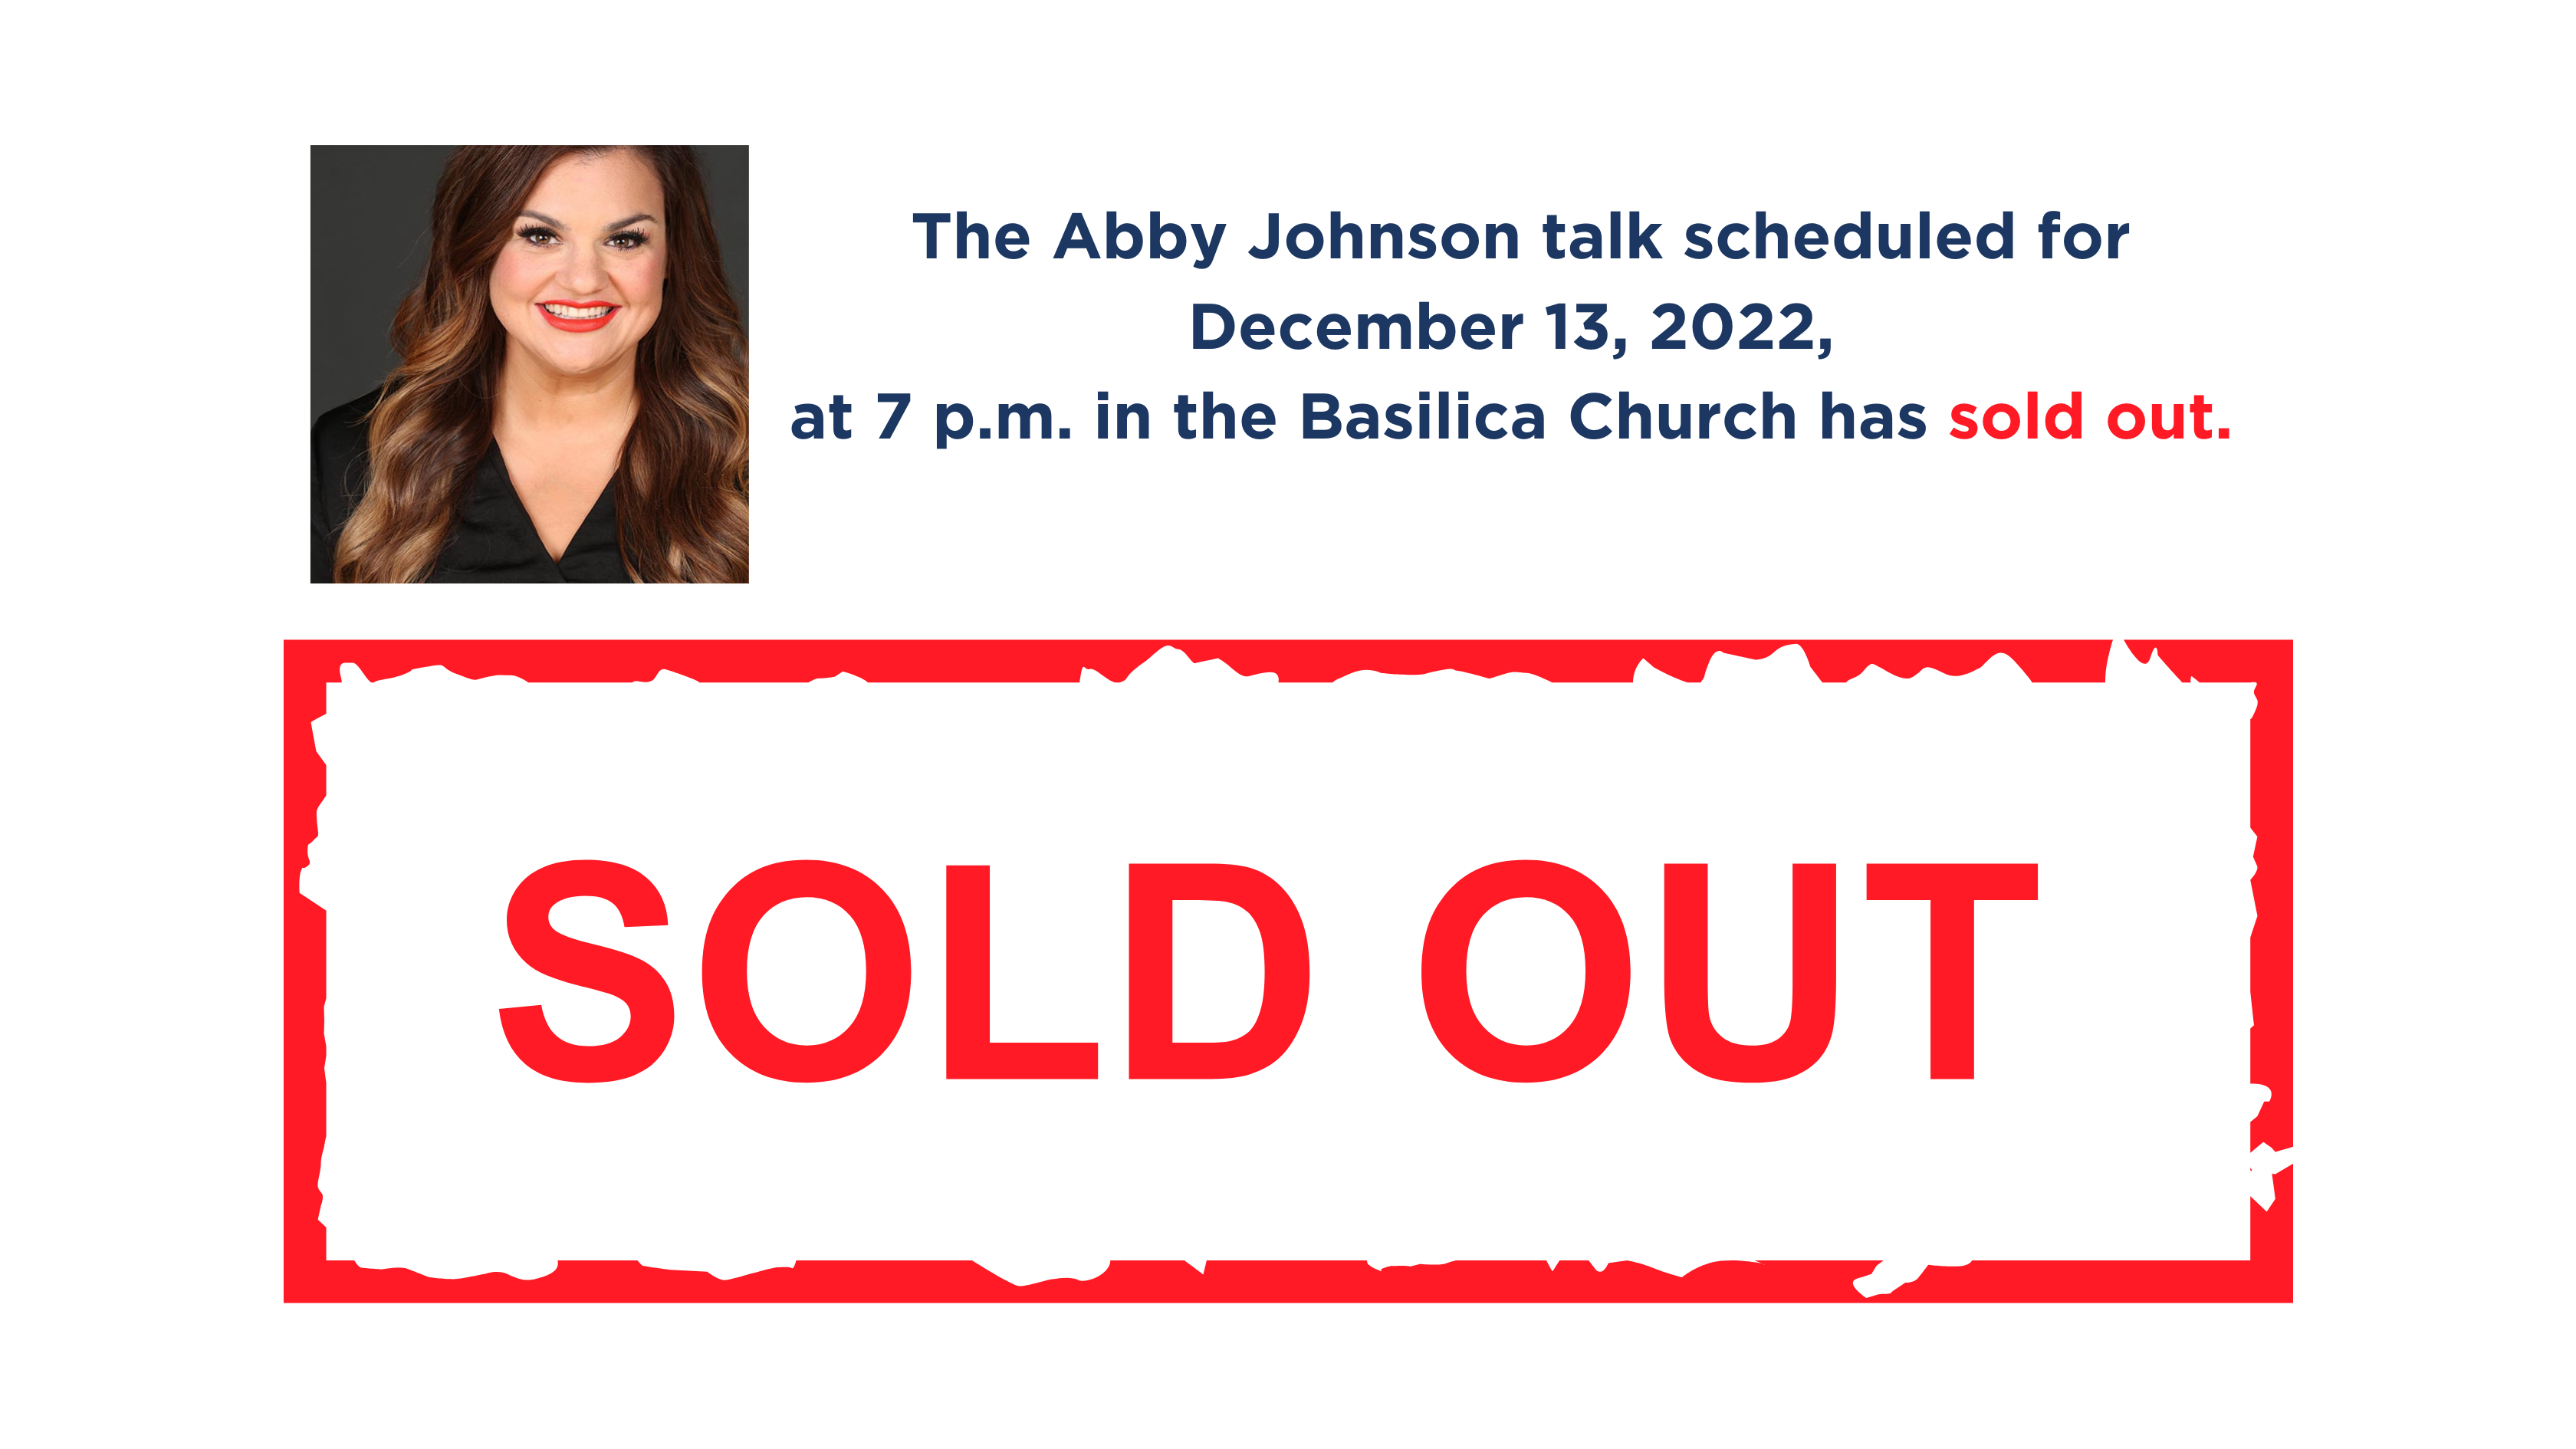 Abby Johnson Talk on December 13 Has Sold Out - The Basilica of Saint Mary